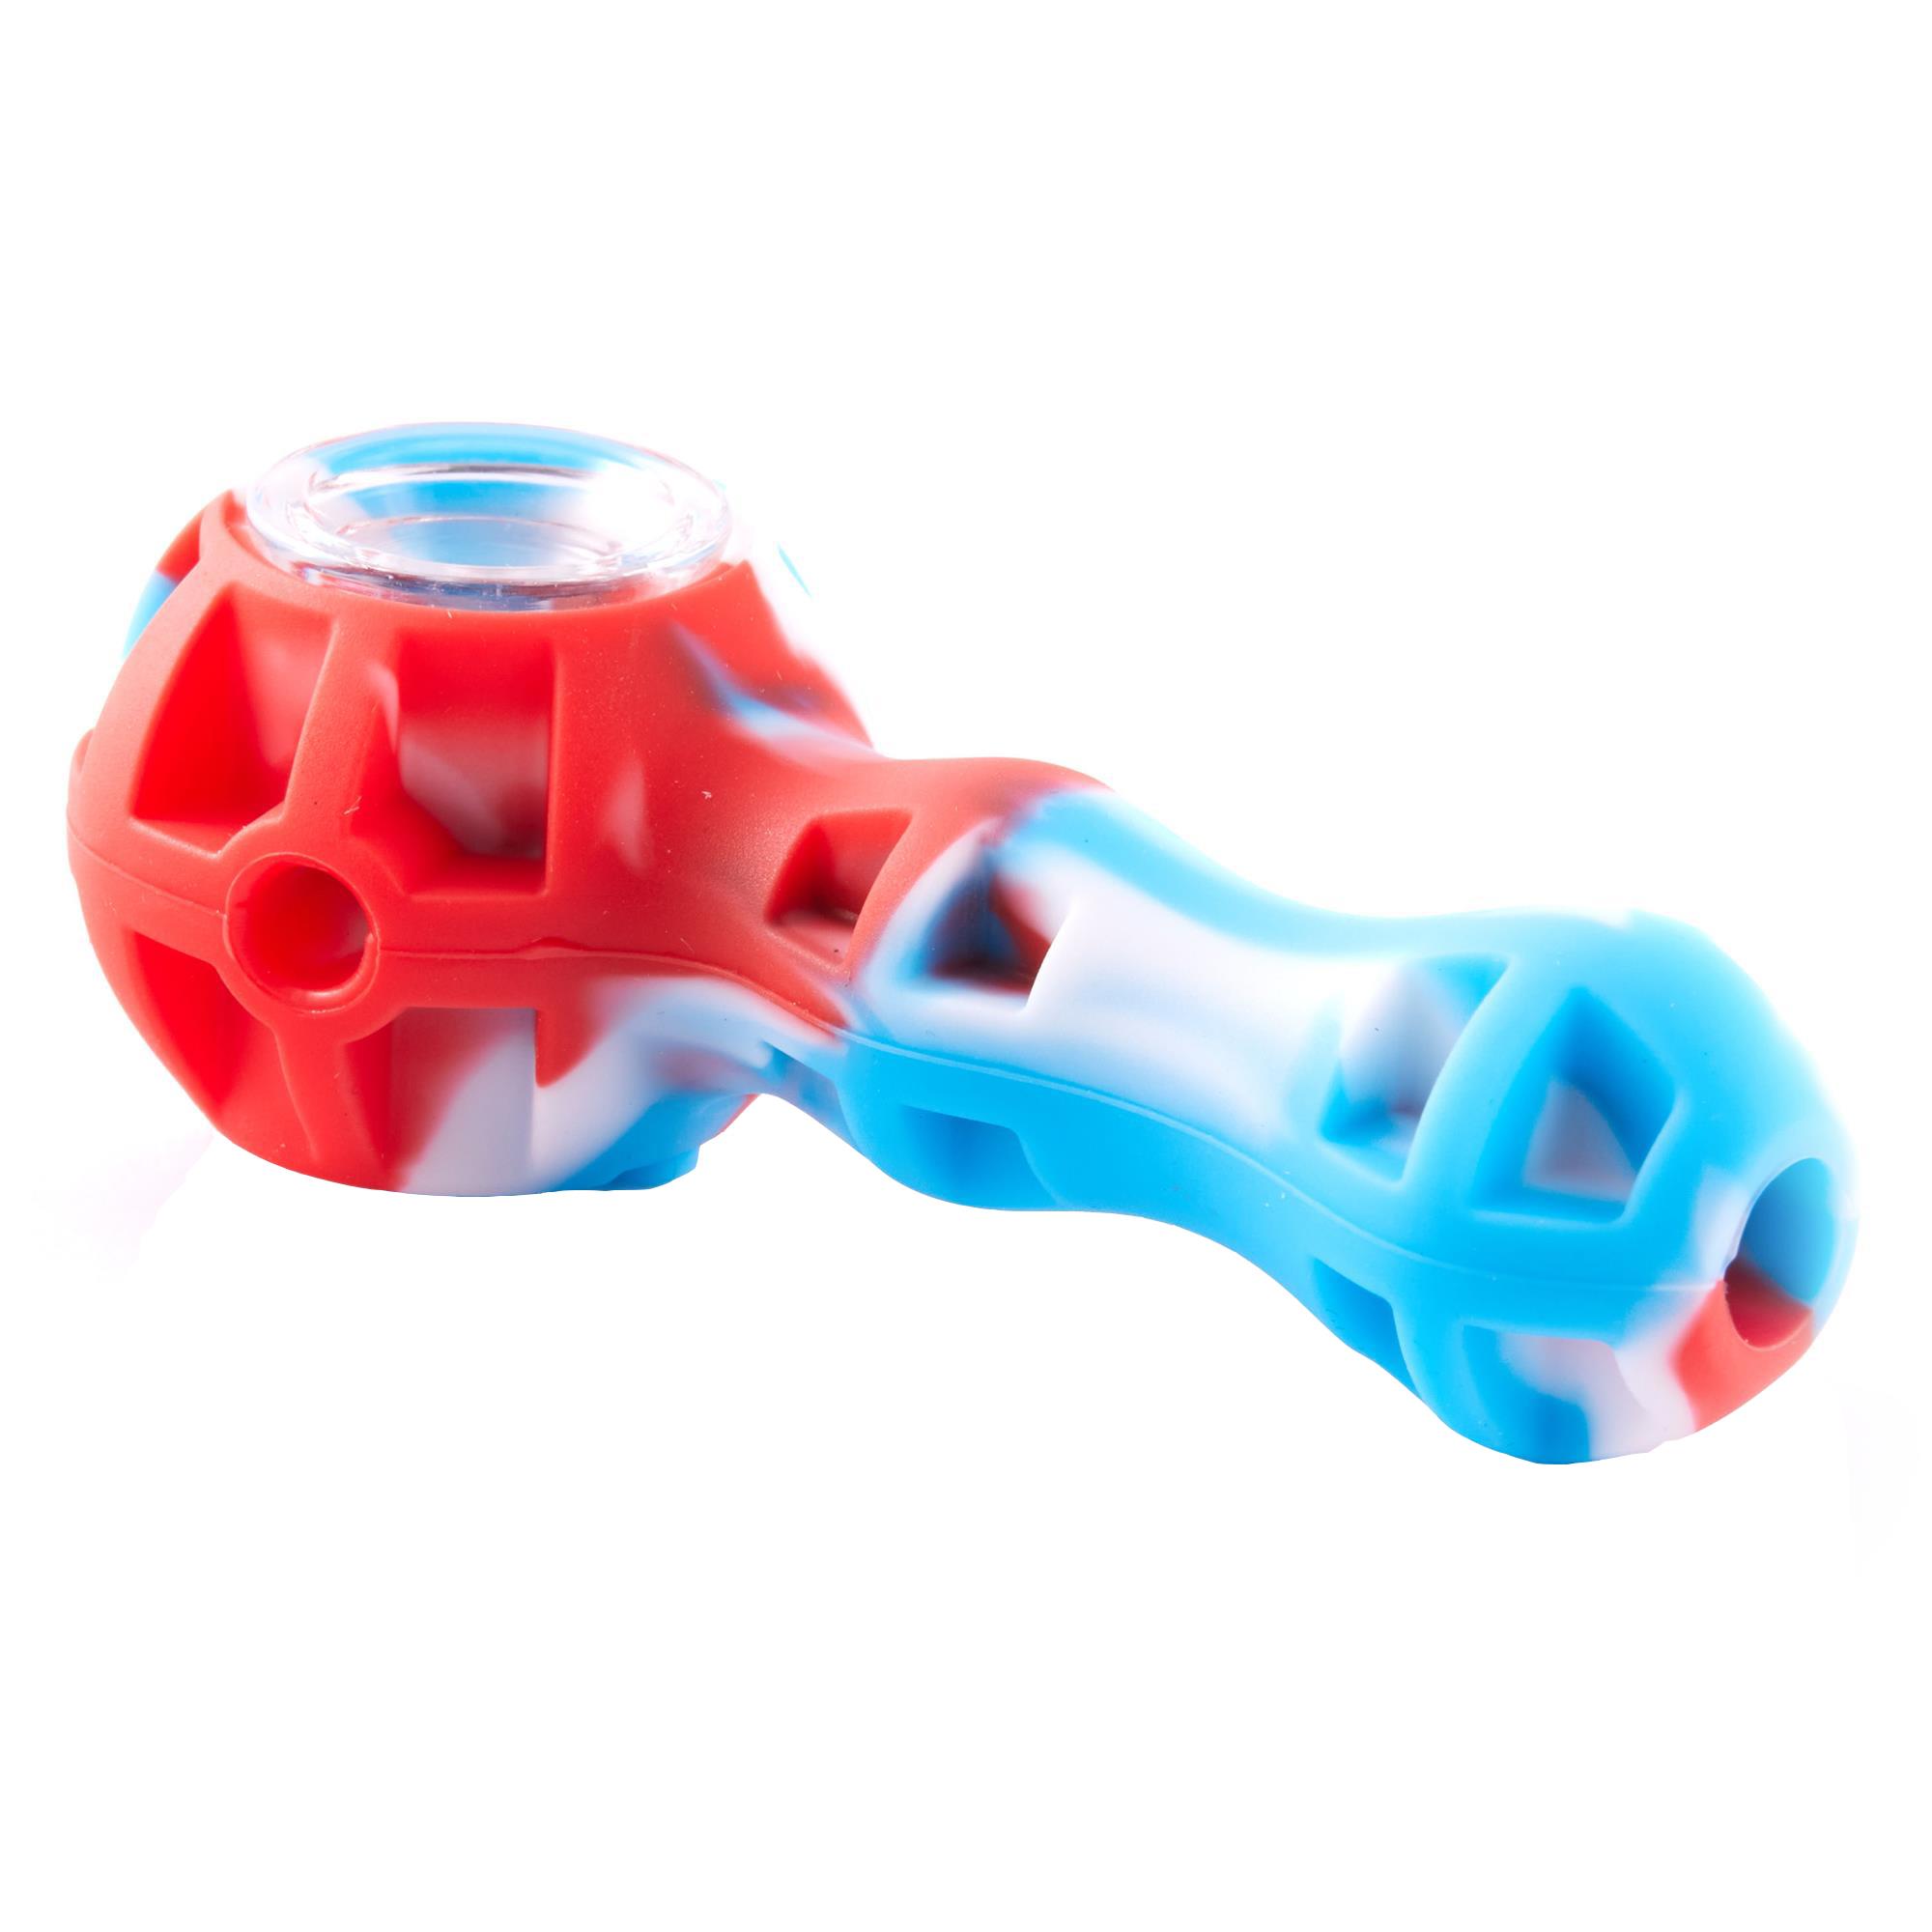 RUGGED SILICONE PIPE